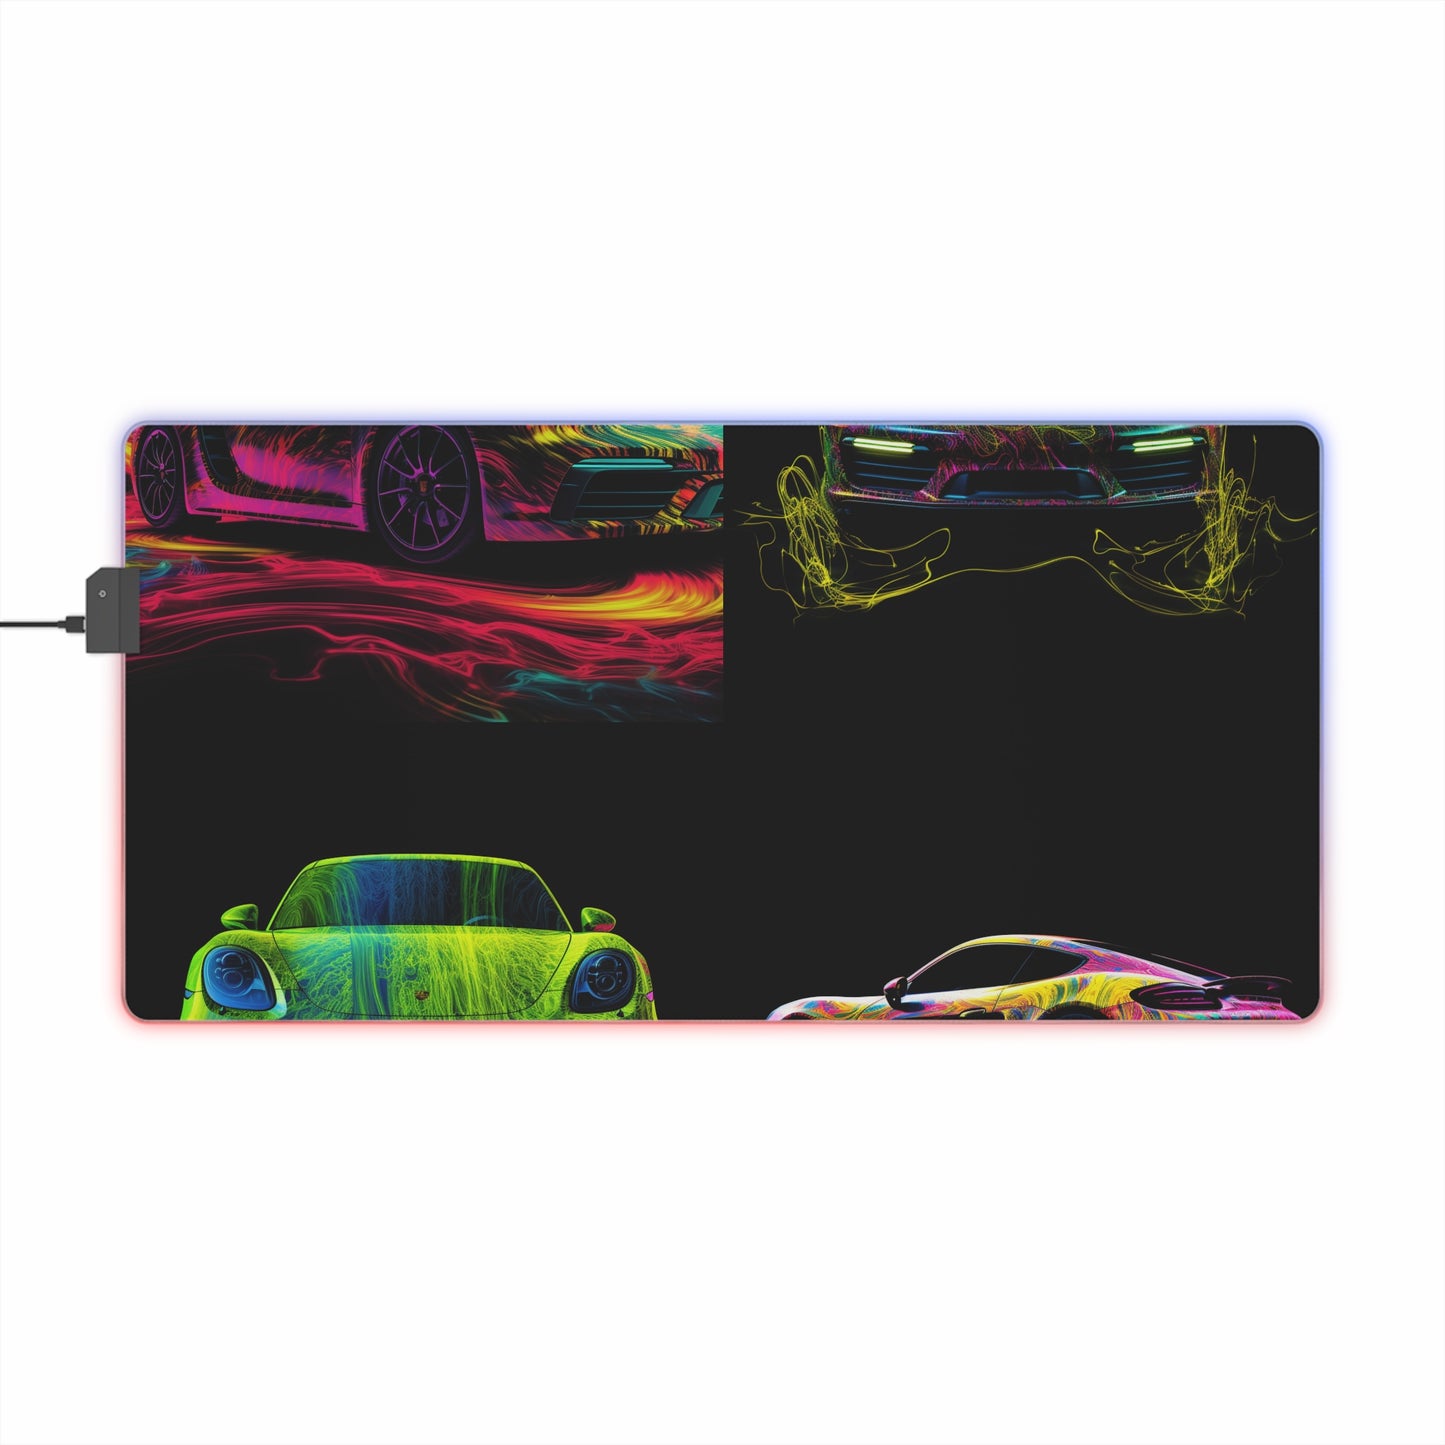 LED Gaming Mouse Pad Porsche Flair 5